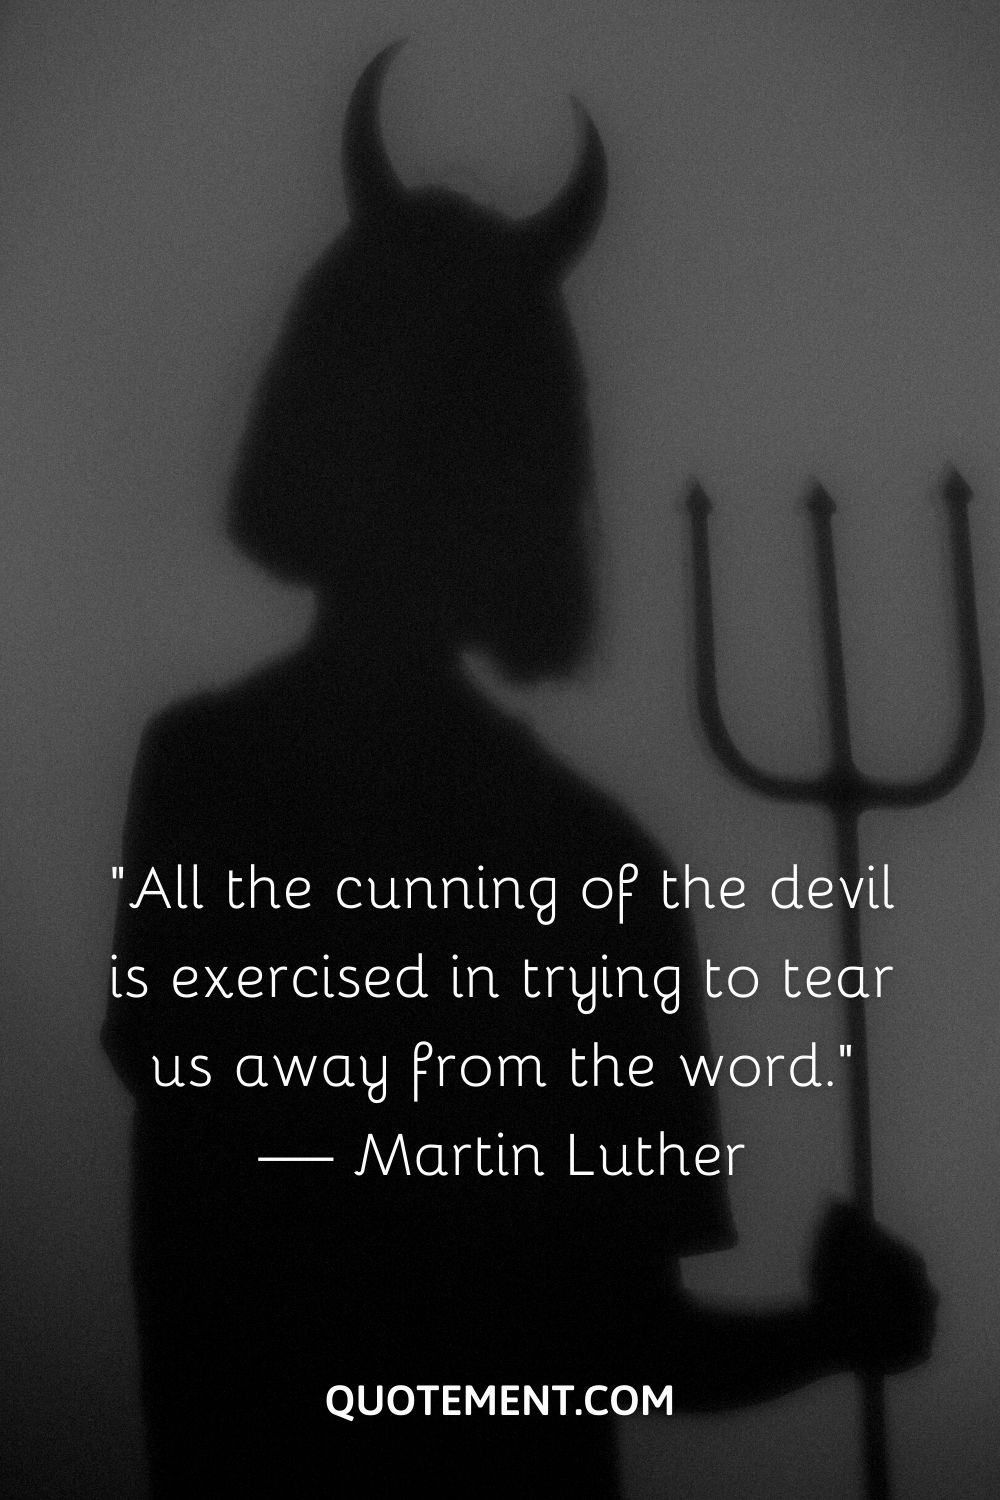 “All the cunning of the devil is exercised in trying to tear us away from the word.” — Martin Luther